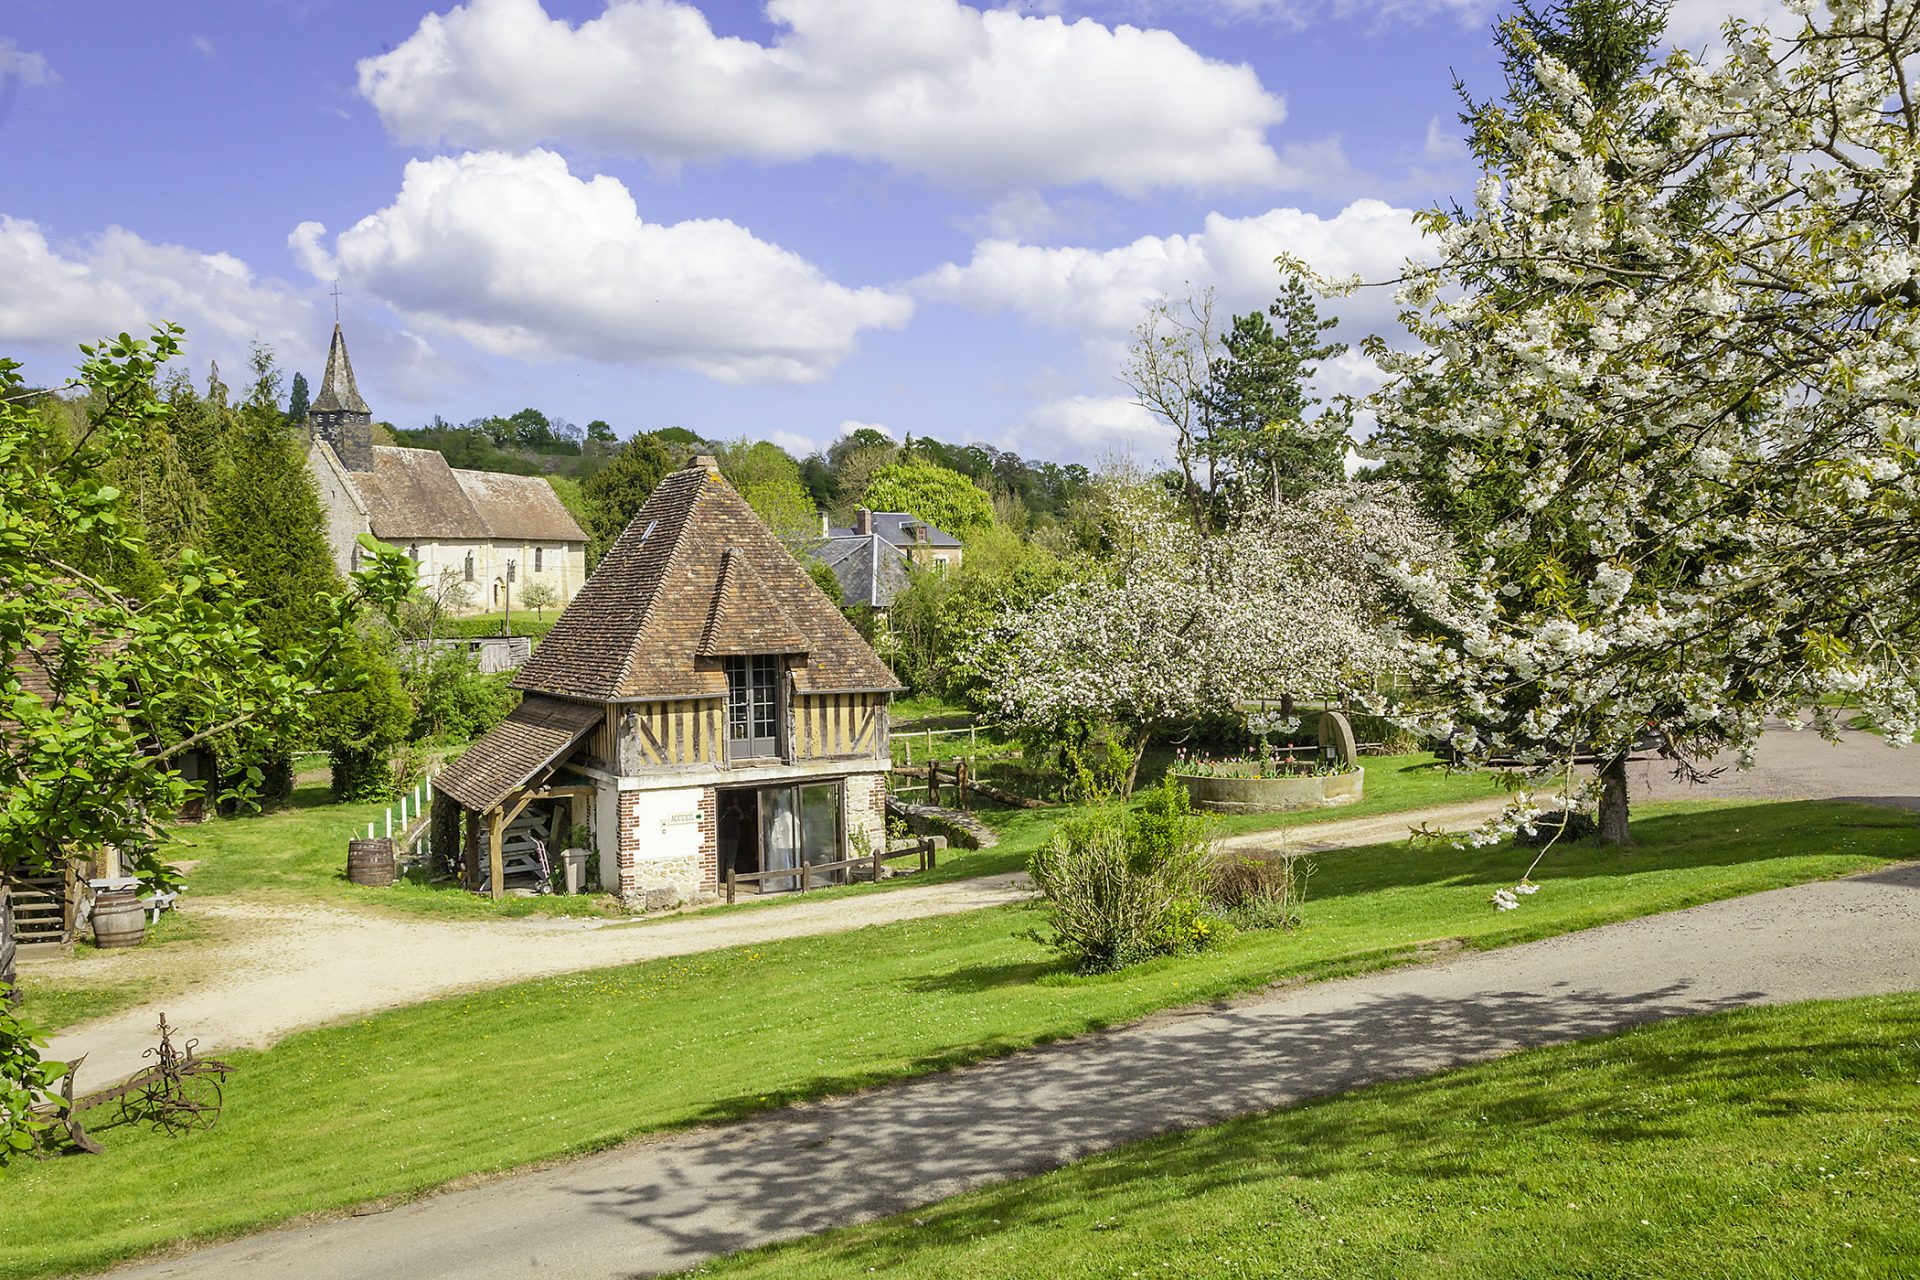 The Normandy Cider Route